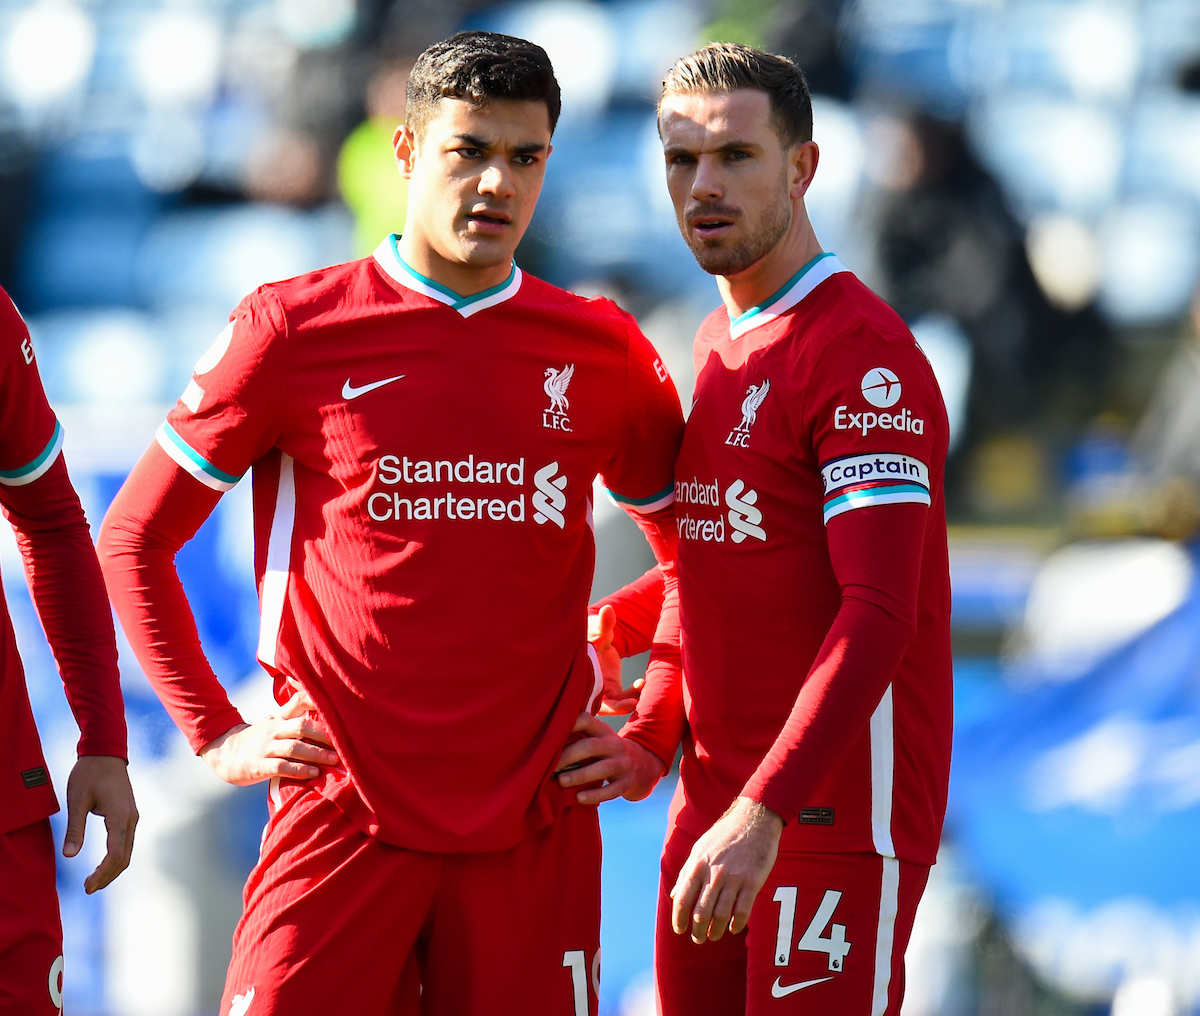 Liverpool's Ozan Kabak (L) and captain Jordan Henderson during the FA Premier League match between Leicester City FC and Liverpool FC at the King Power Stadium